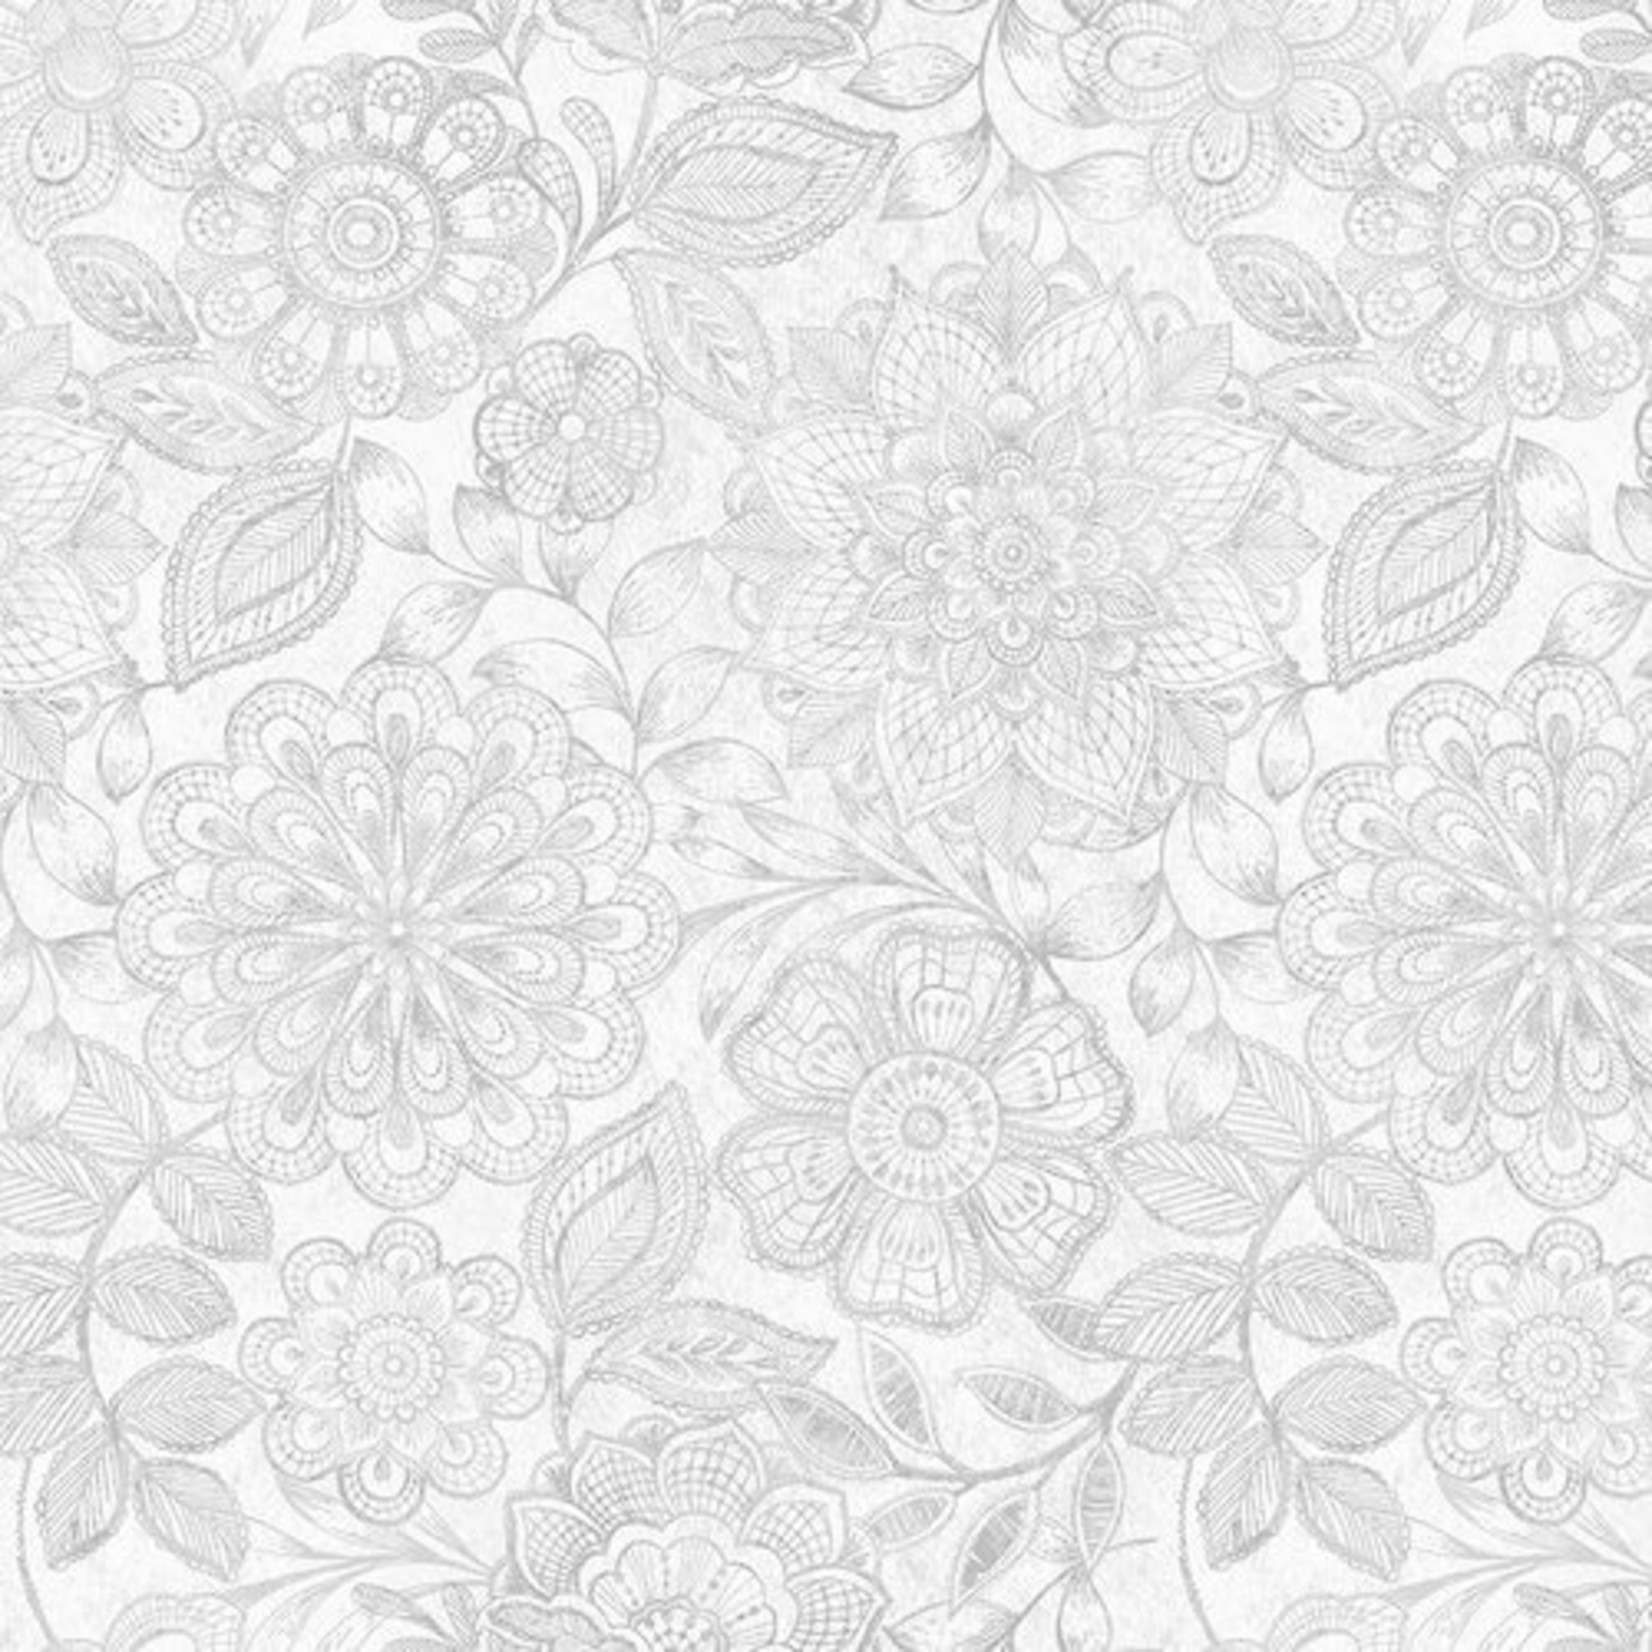 Blank Quilting Corp Eufloria, Grey (2072-90) 108in Wide $0.30 per cm or $30/m